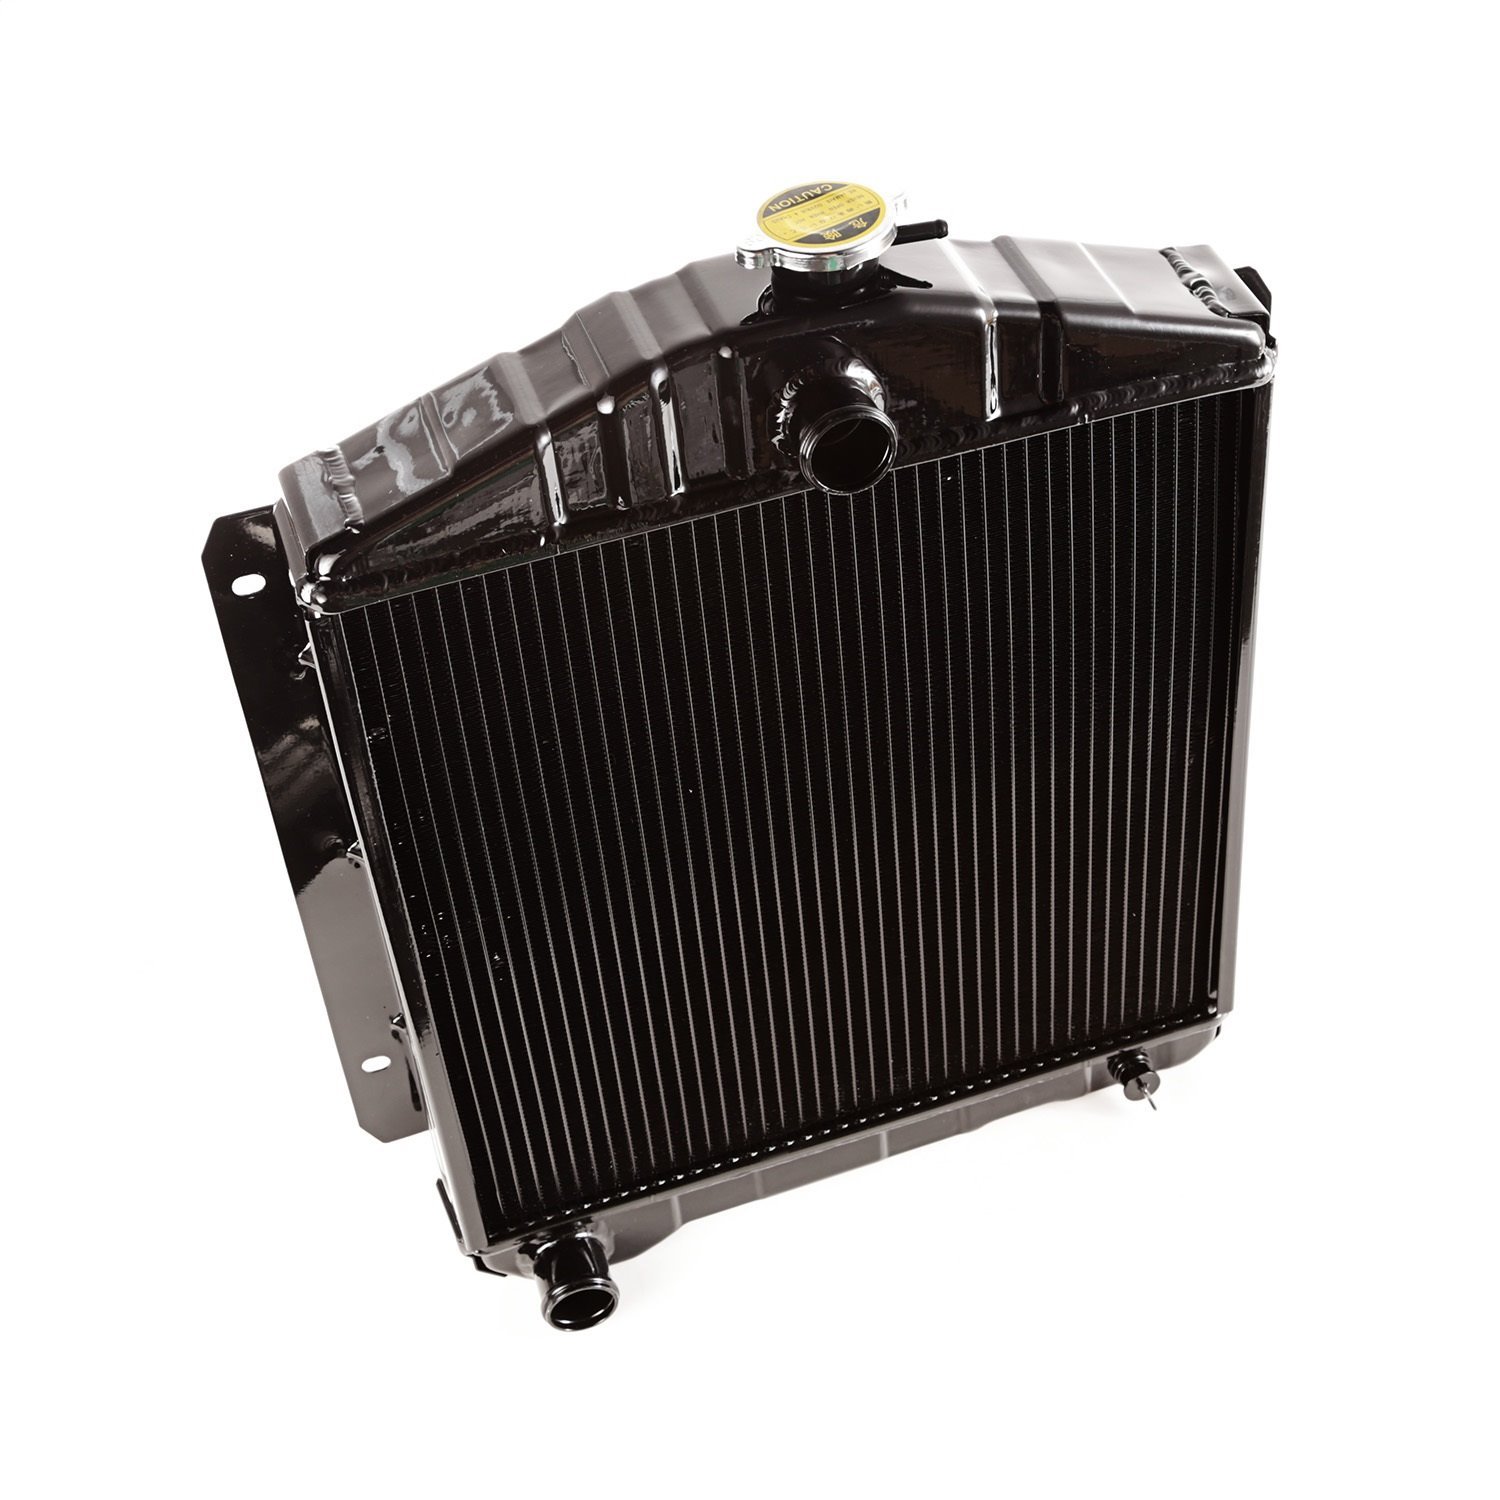 This 2 row radiator from Omix-ADA fits 55-71 CJ5 and 55-71 CJ6 with a 134 CI Engine.